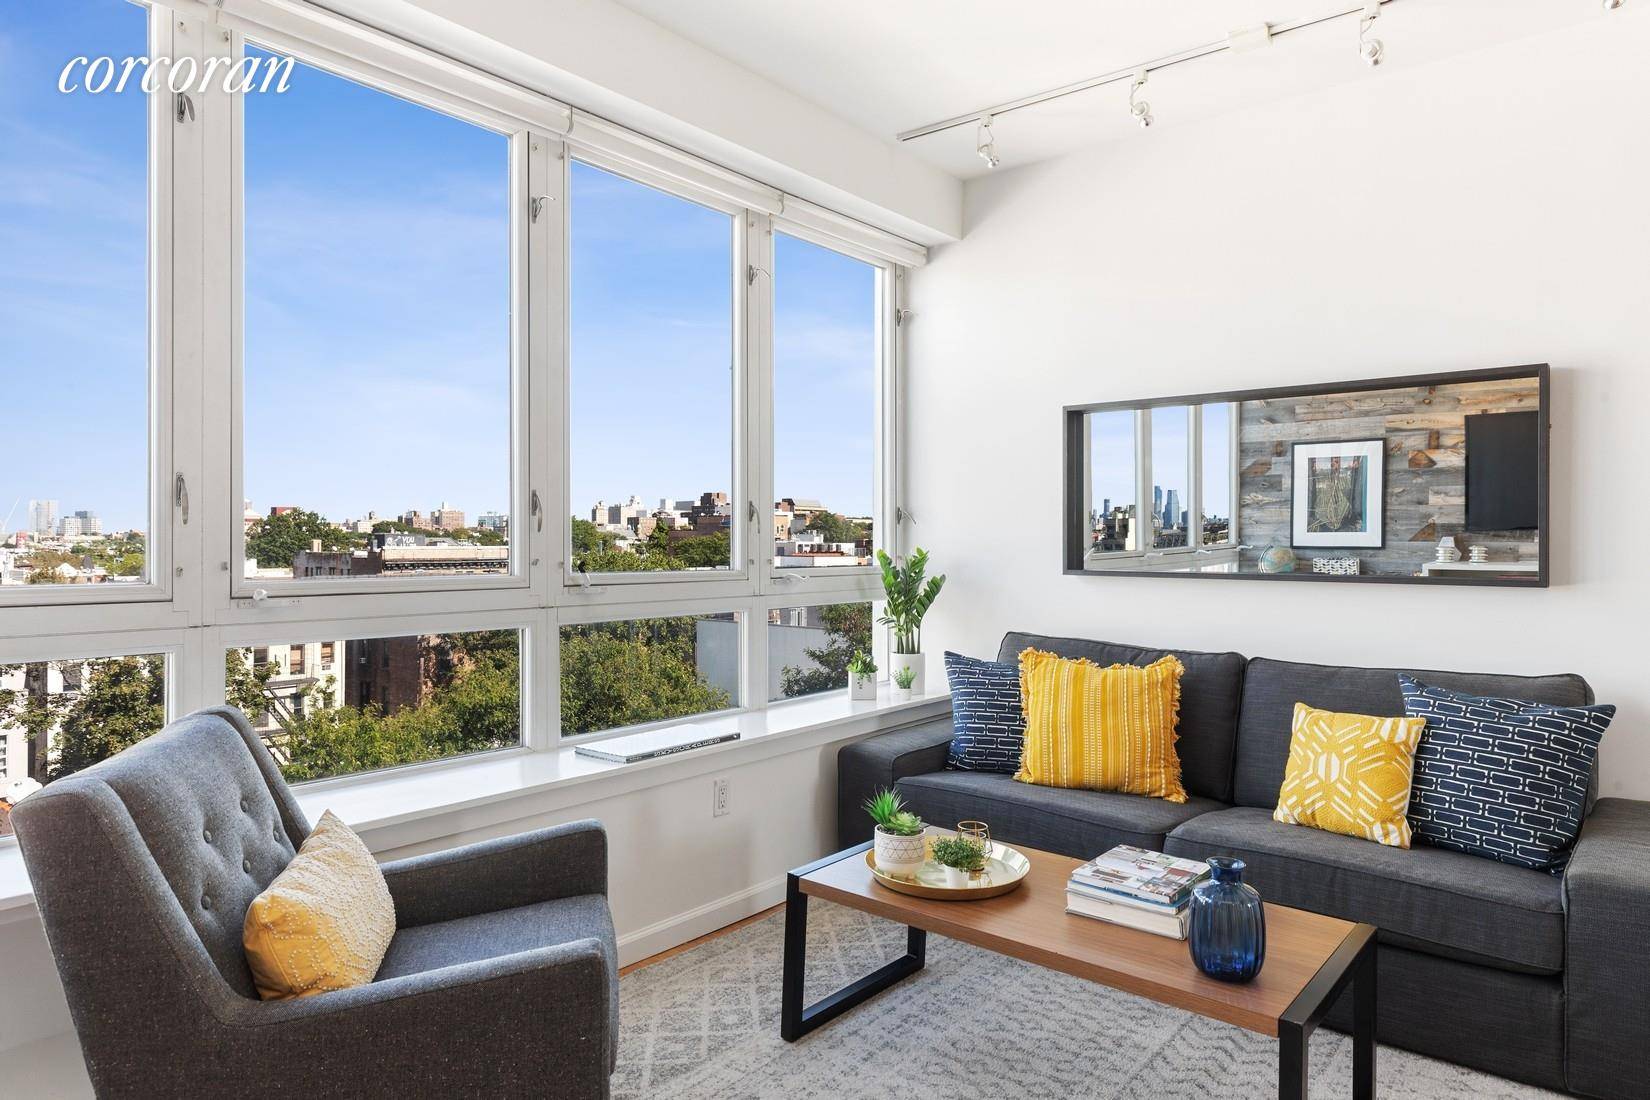 SPECTACULAR Park Slope condo with LOADS of amenities and enviable LIGHT AND VIEWS.